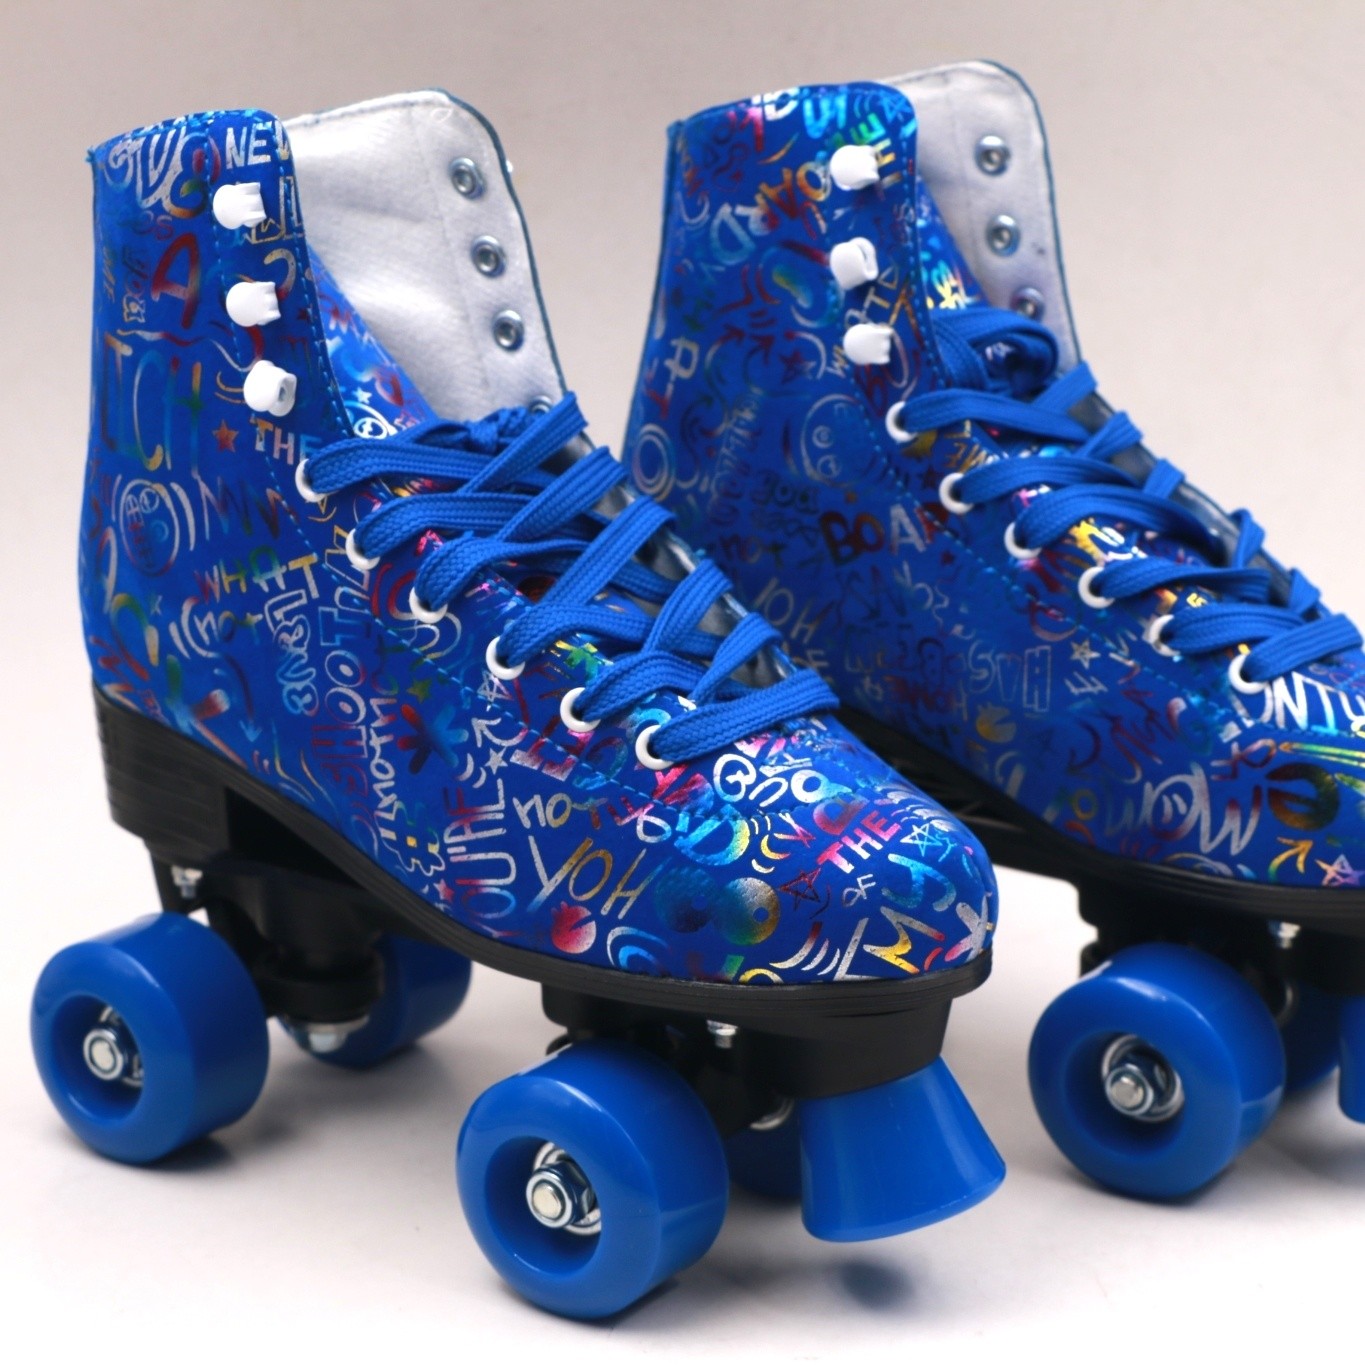 Blue suede multi-colorful words cheap roller skate sport girl skating shoes